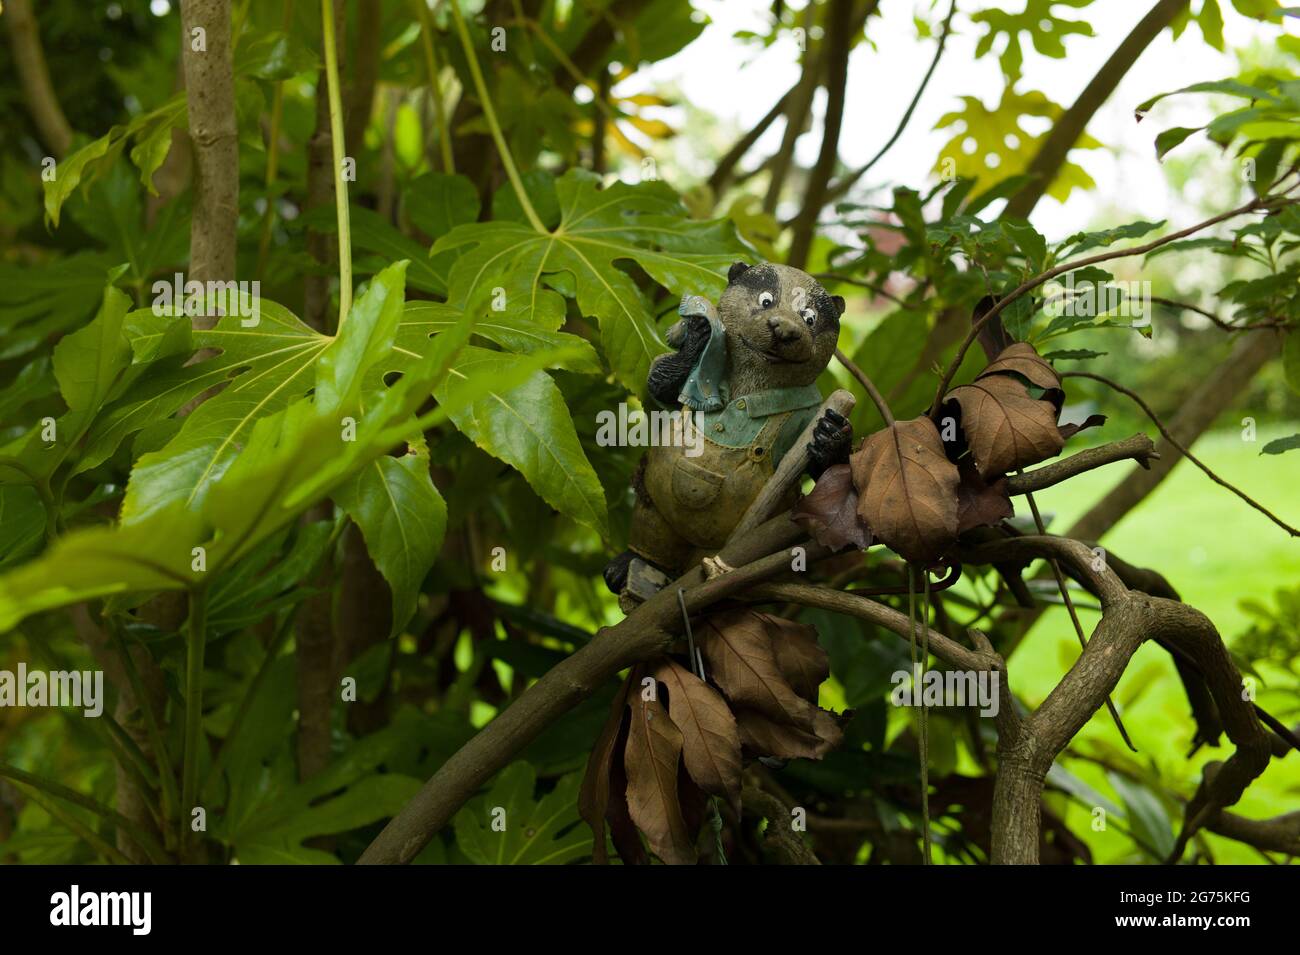 A plastic badger in a bush Stock Photo